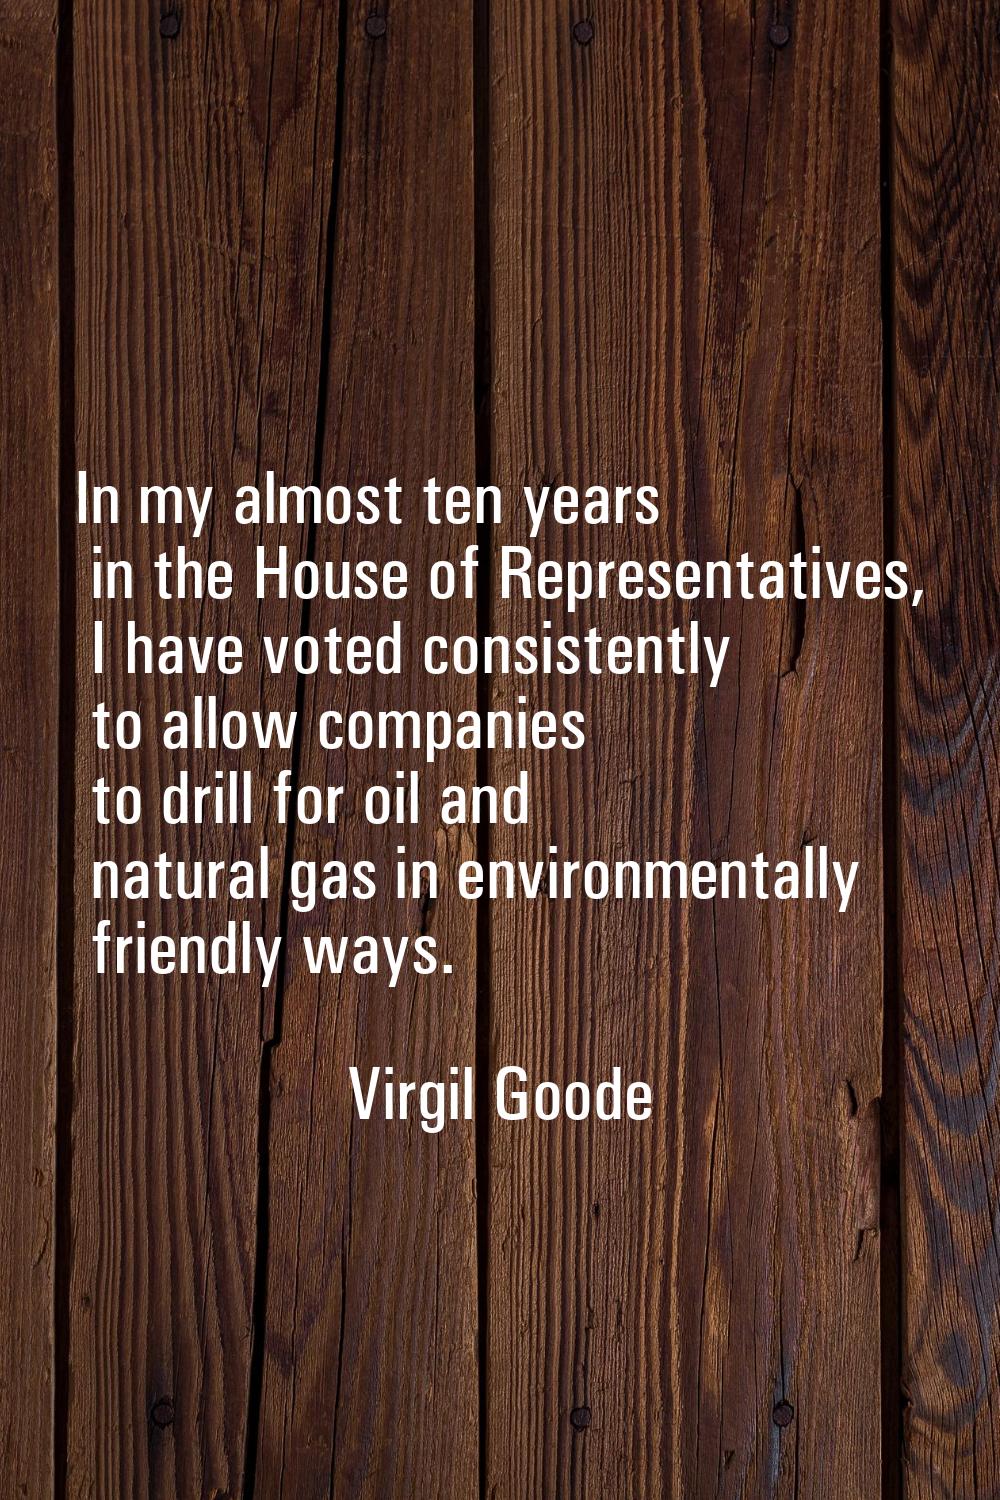 In my almost ten years in the House of Representatives, I have voted consistently to allow companie